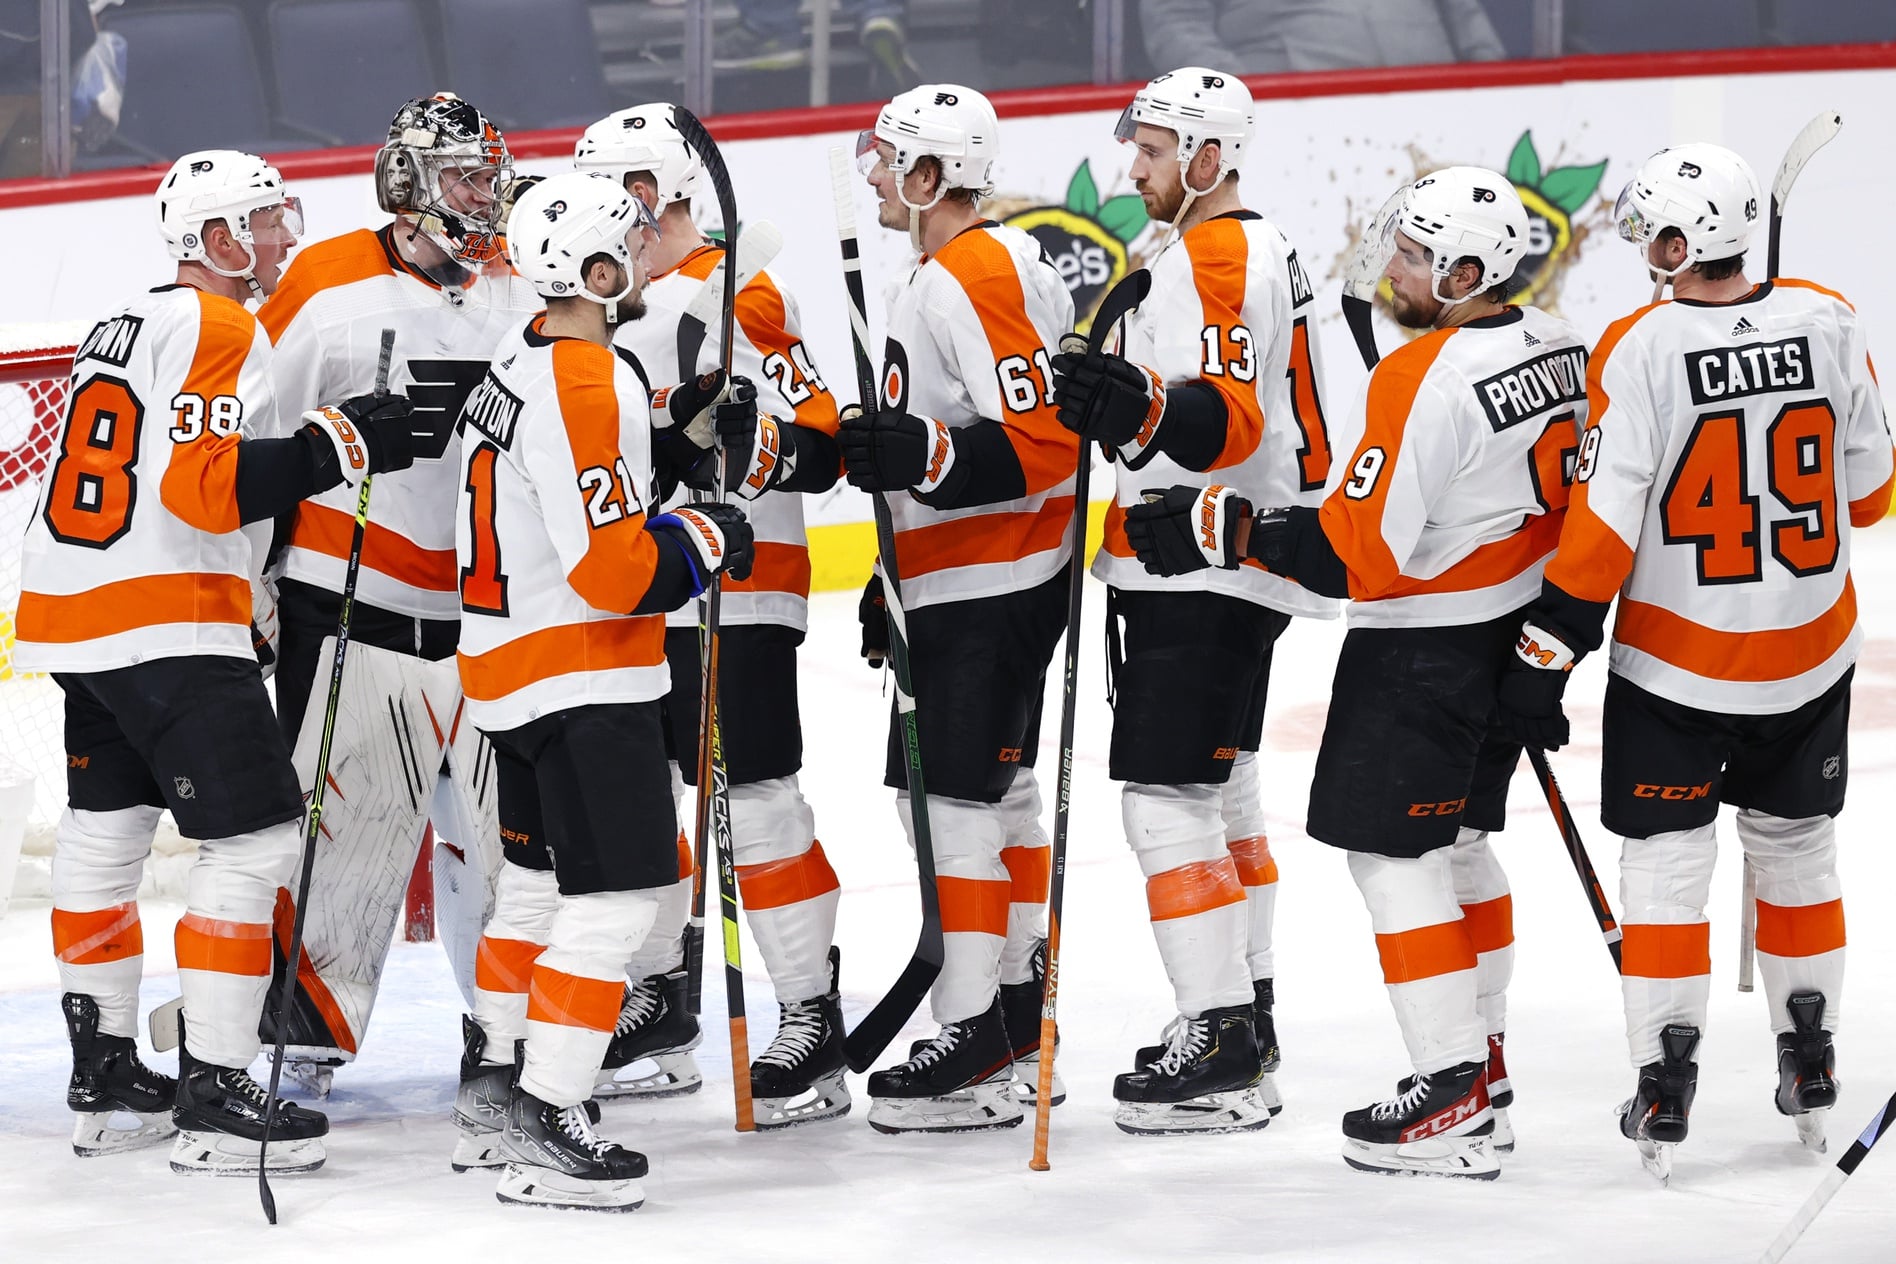 “We’re Not There Yet” – Flyers Send Letter to Season Ticket Holders